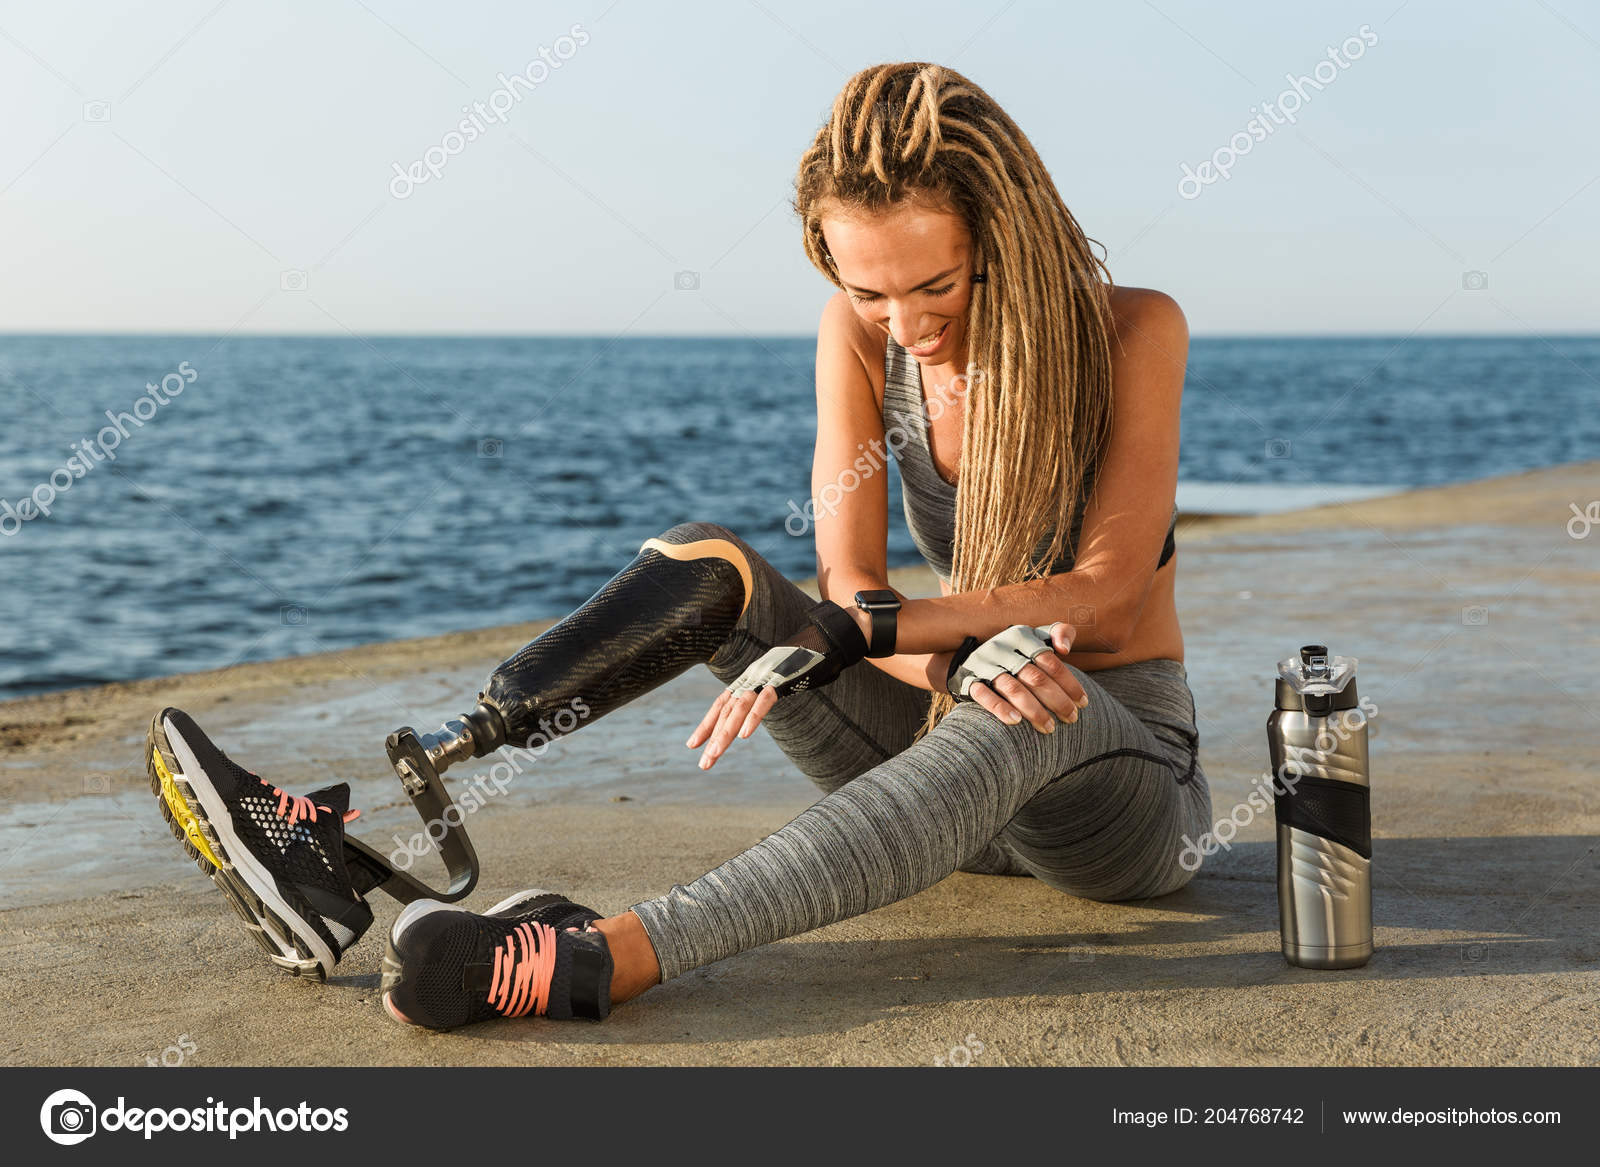 Sportswoman with prosthetic leg smiling while using mobile phone